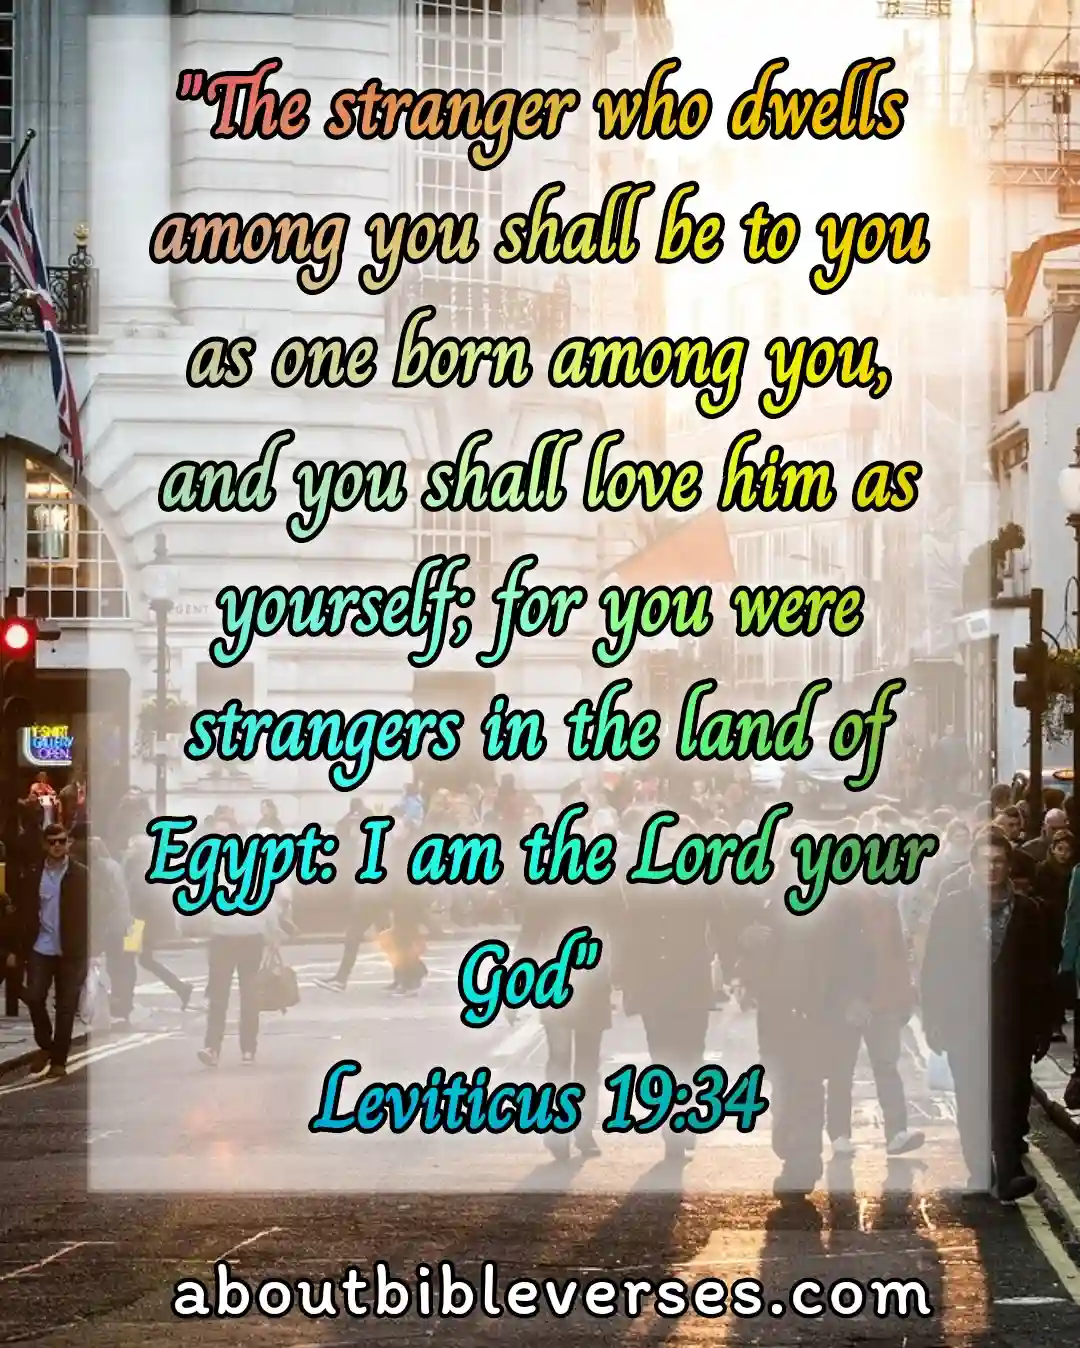 today bible verse (Leviticus 19:34)